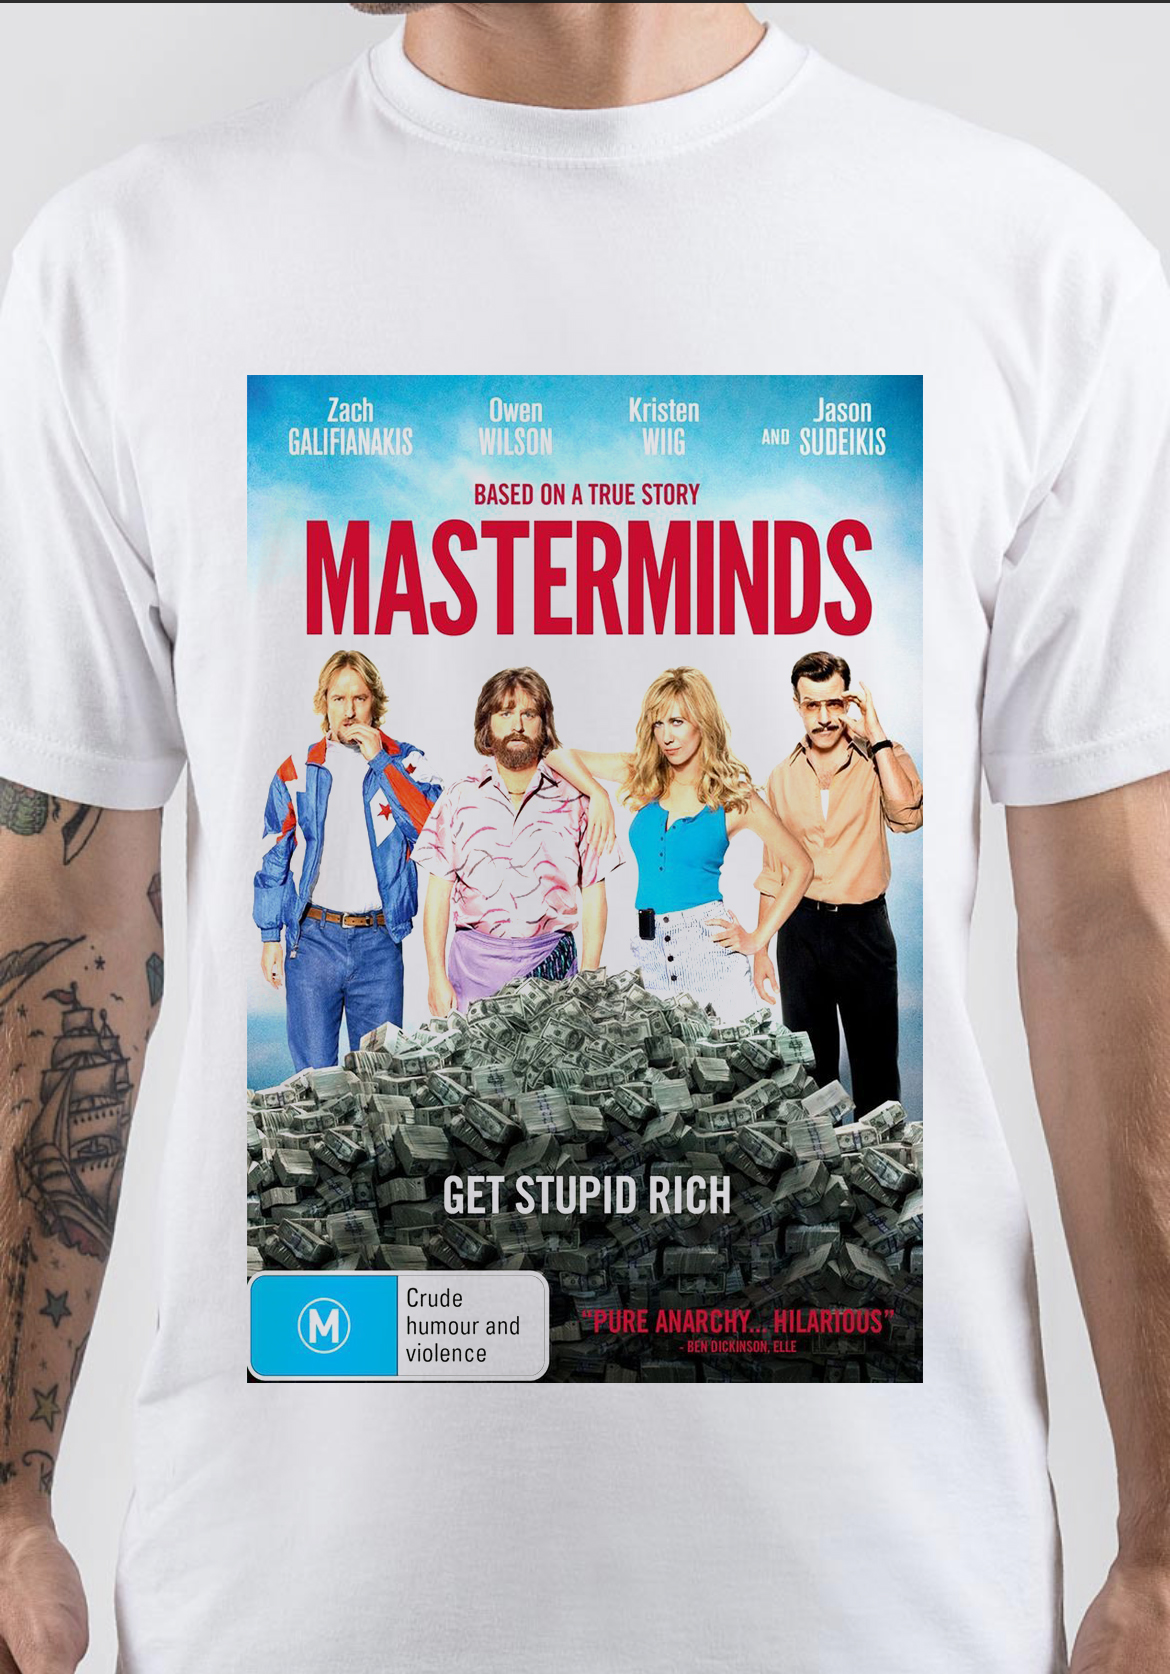 Masterminds T-Shirt And Merchandise